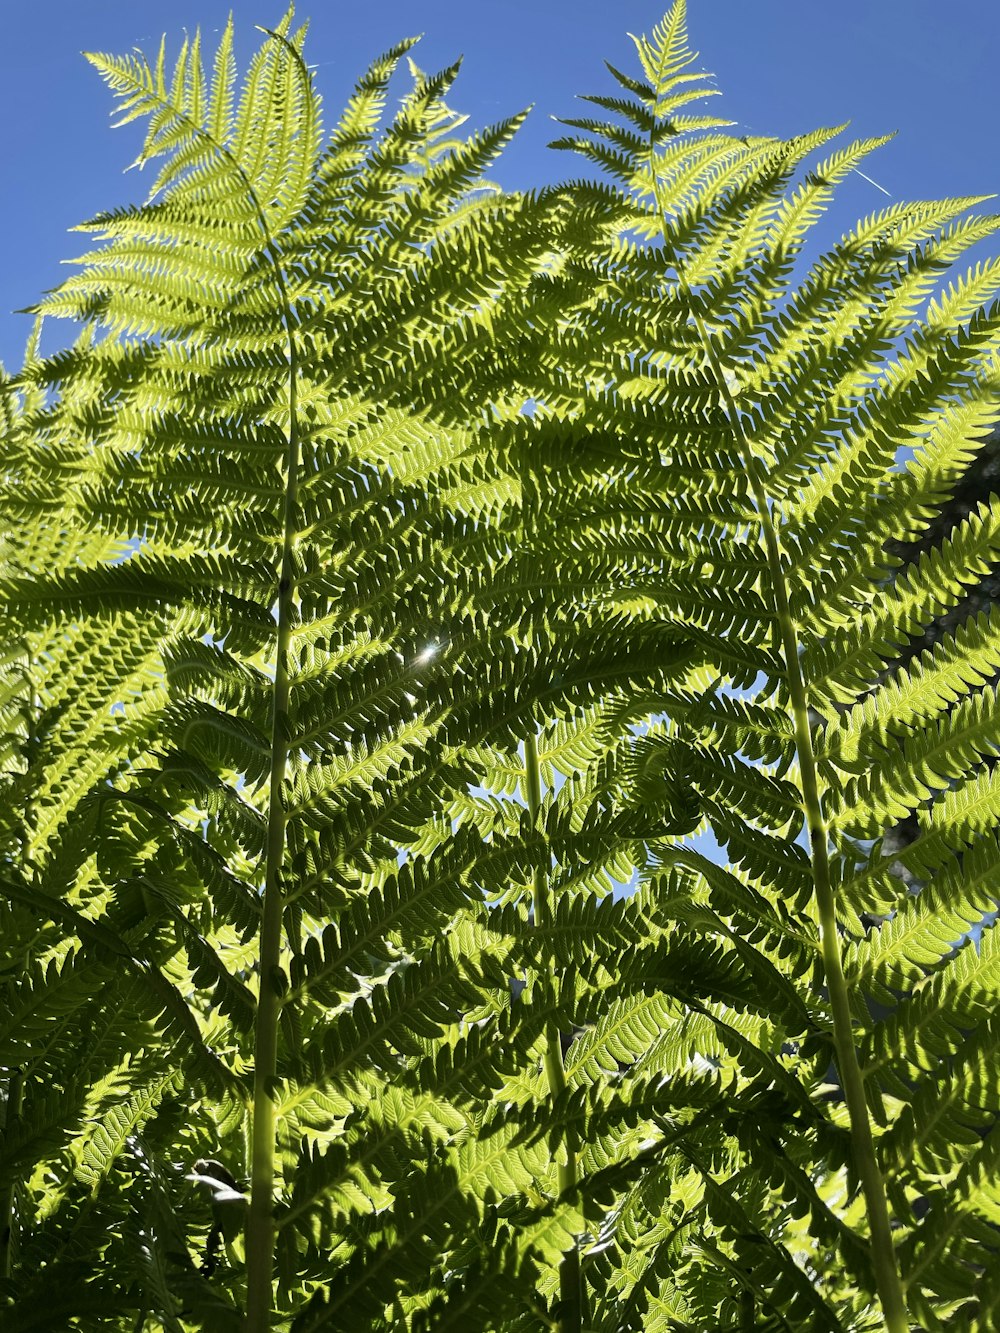 a close up of a green plant with a blue sky in the background